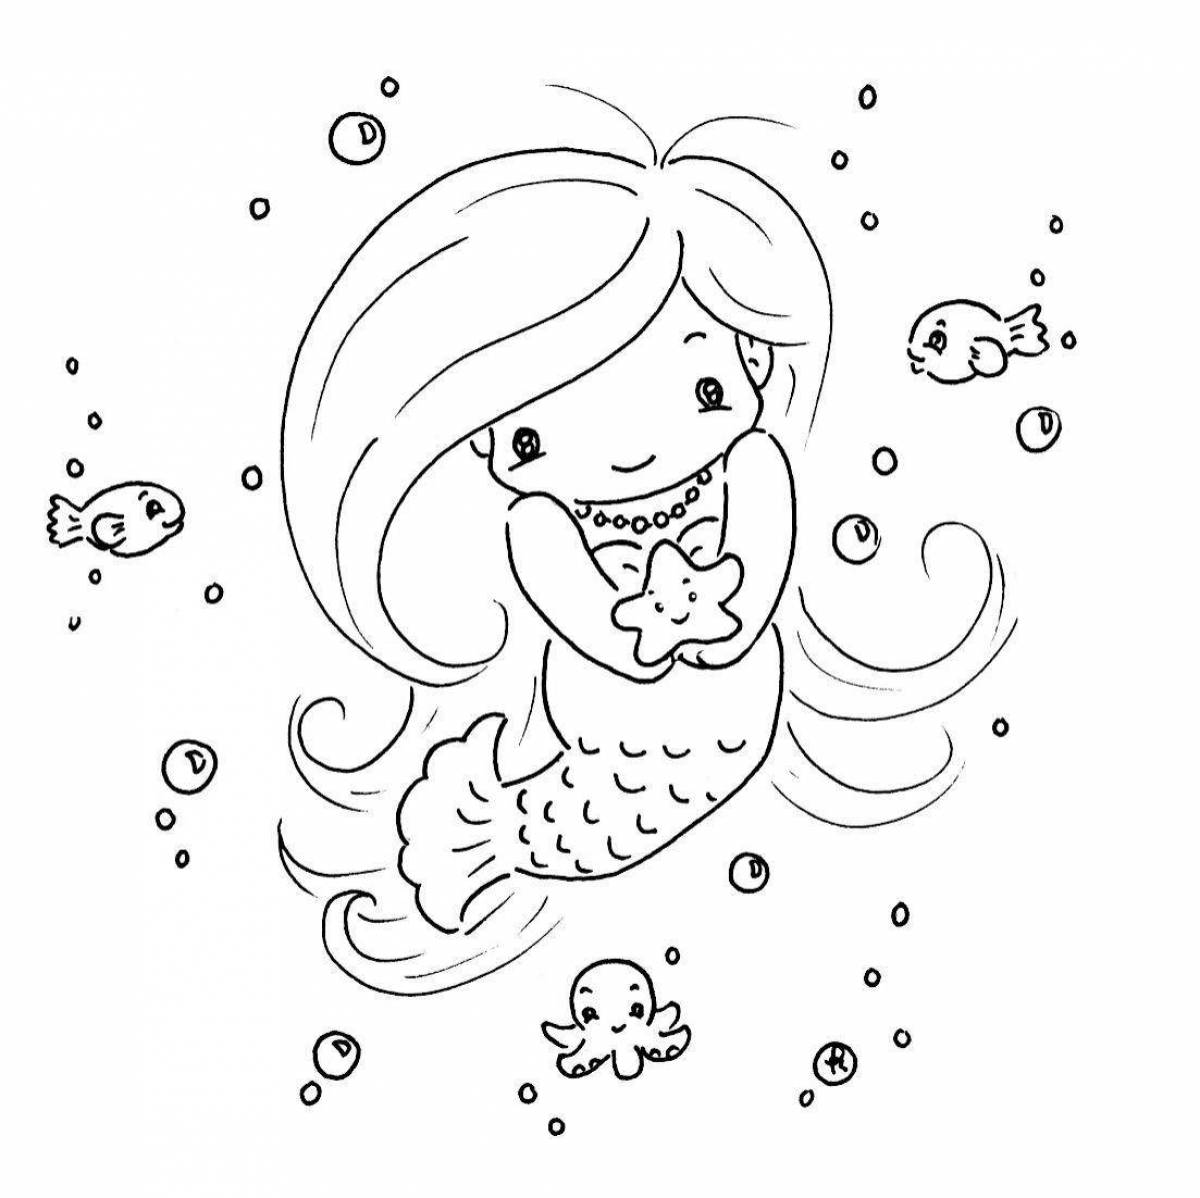 Adorable little mermaid coloring book for 3-4 year olds